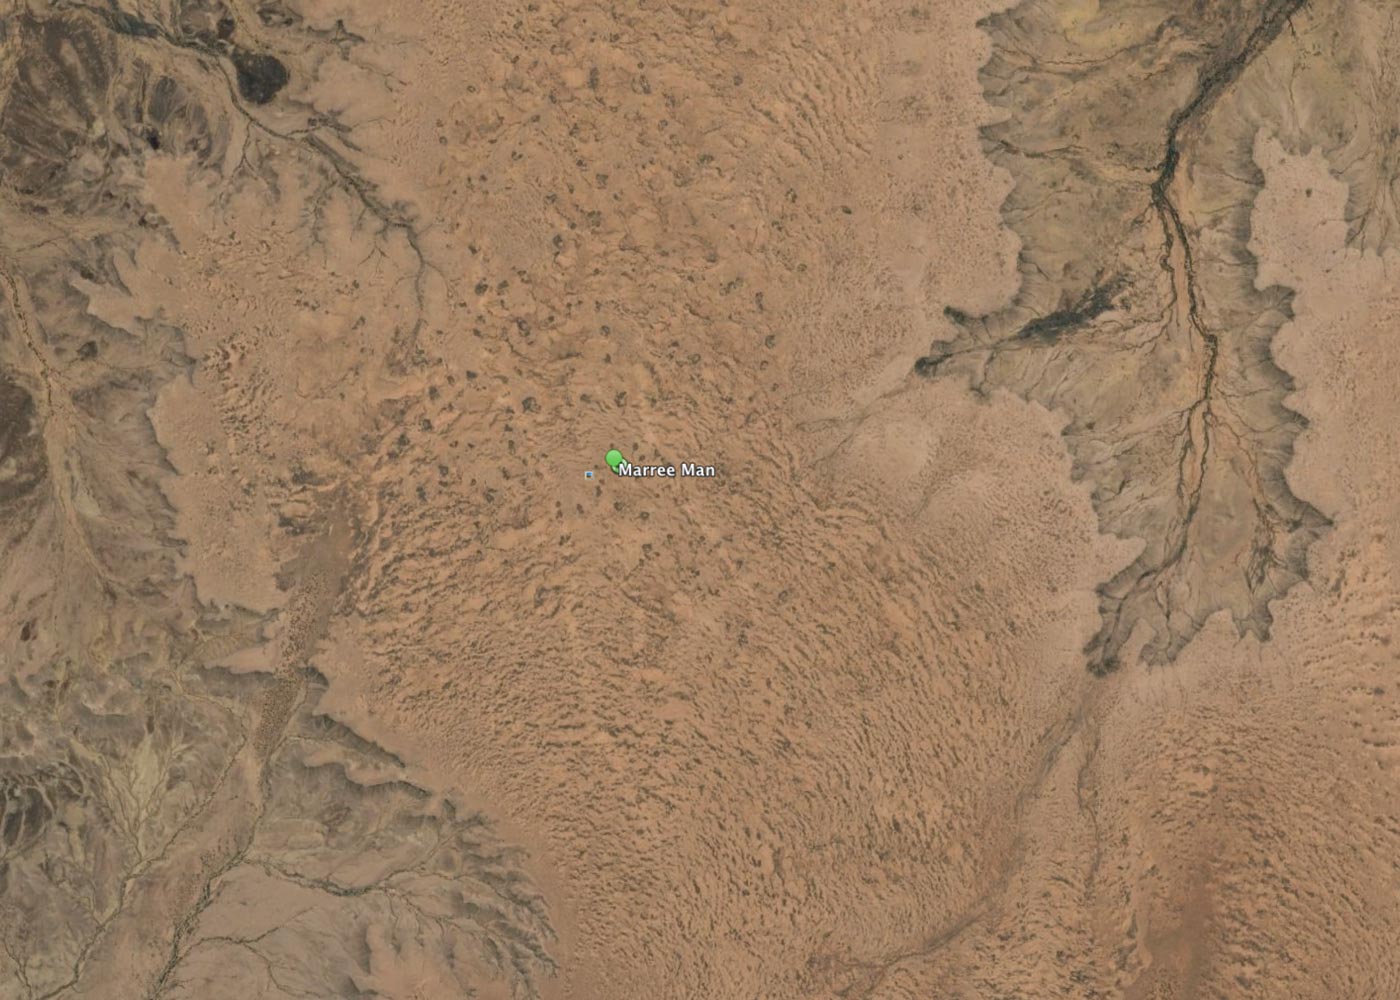 Image of Marree Man from Google Earth - 20/8/2016